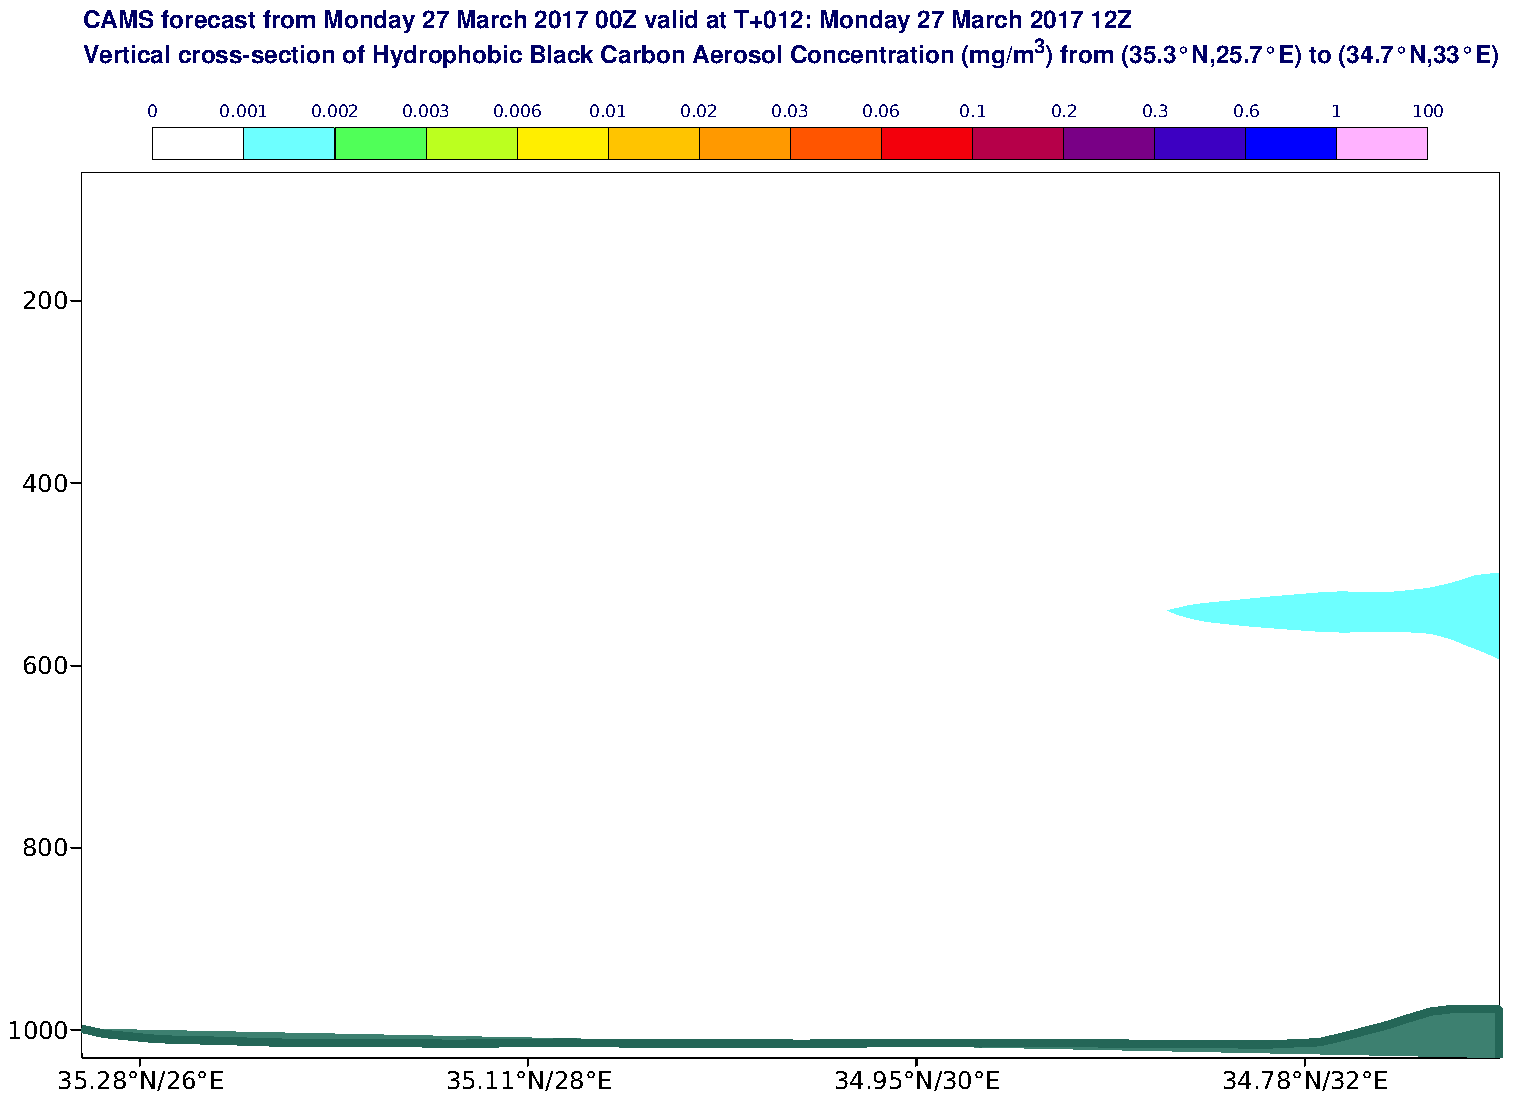 Vertical cross-section of Hydrophobic Black Carbon Aerosol Concentration (mg/m3) valid at T12 - 2017-03-27 12:00